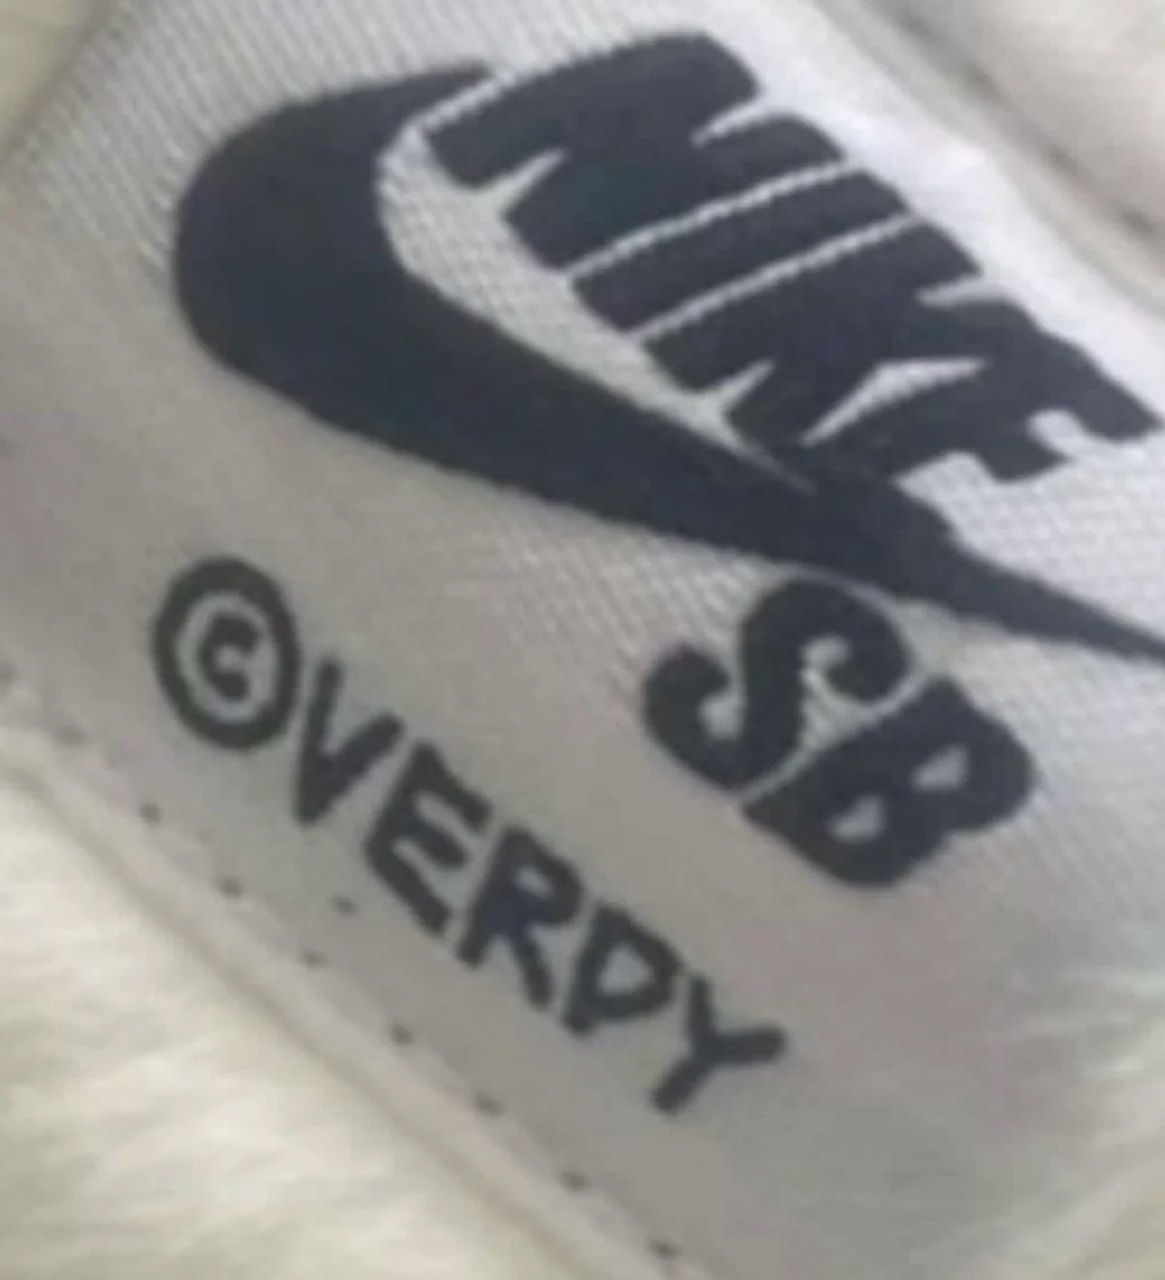 verdy nike sb skateboarding dunk low vick girls dont cry summer 2023 release date official info photos store list buying guide white black fn6039 100